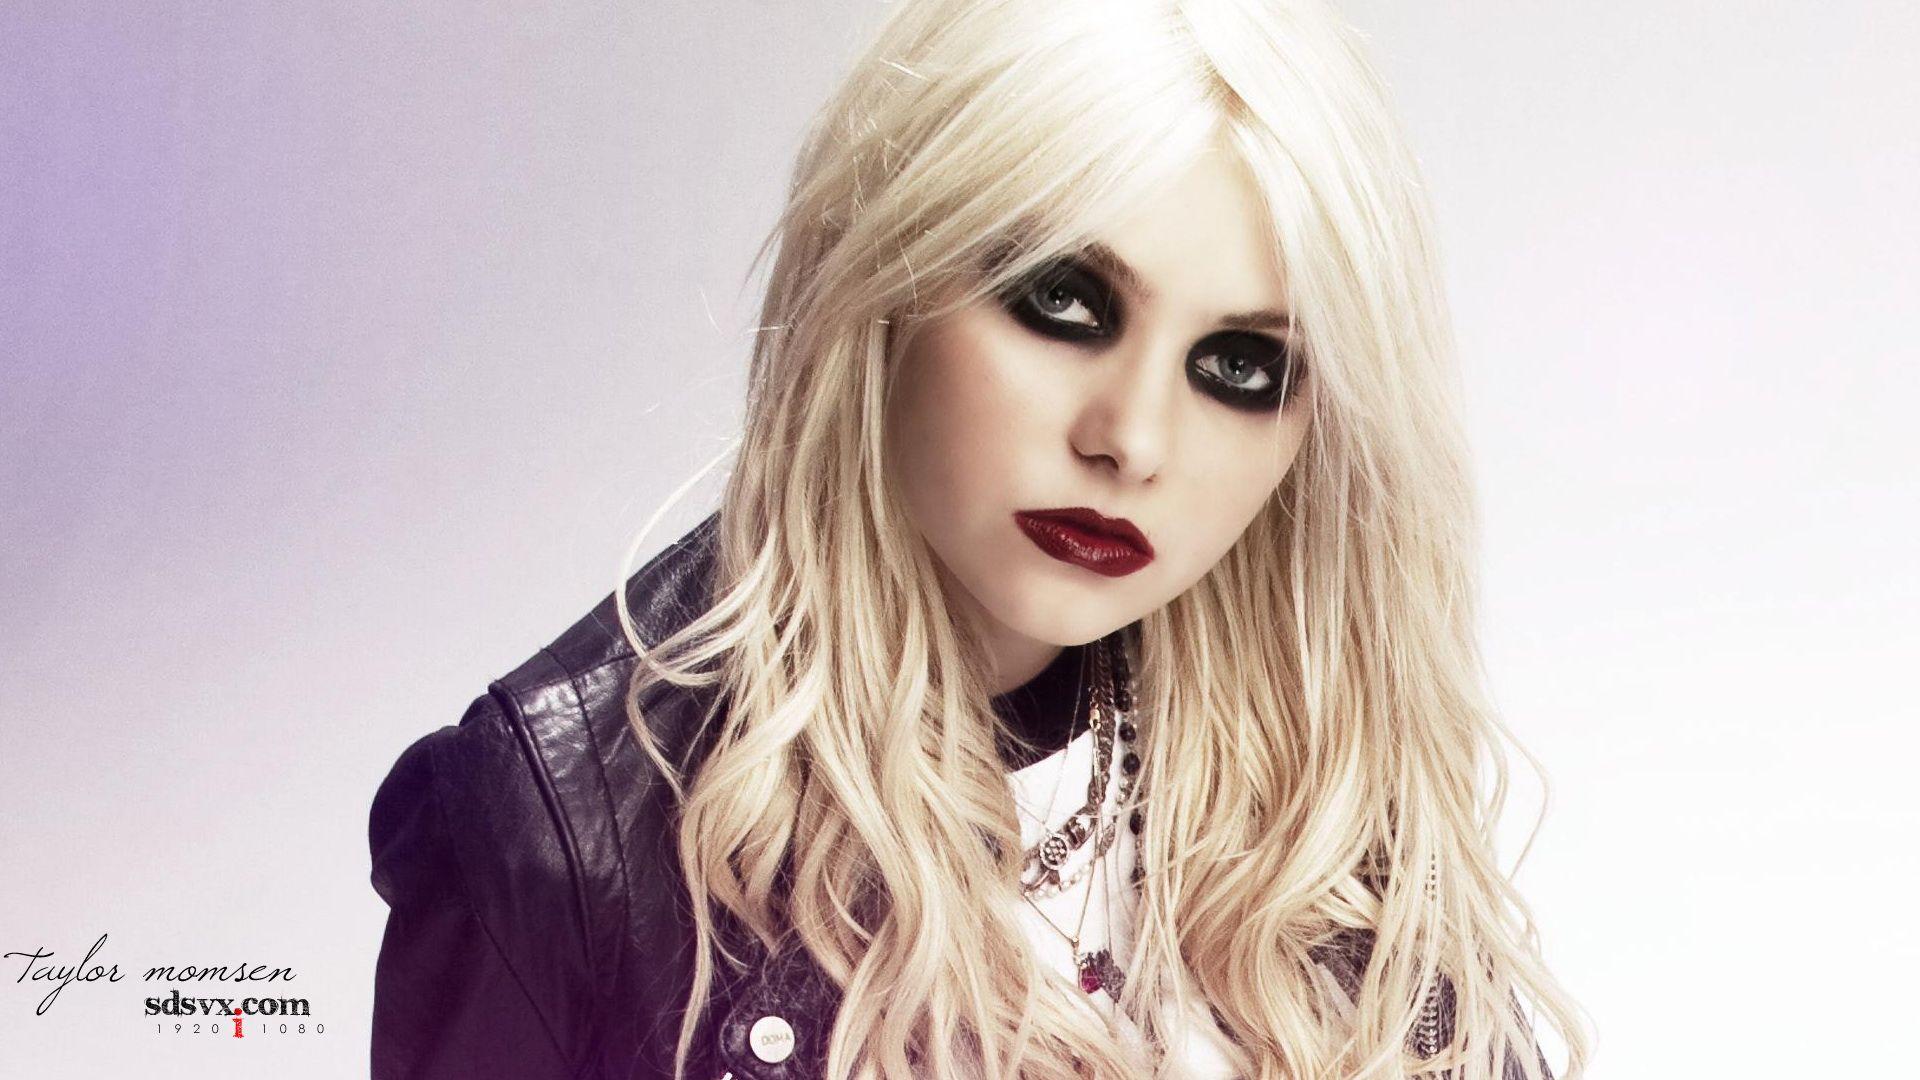 taylor momsen Full HD Wallpaper and Background Imagex1080